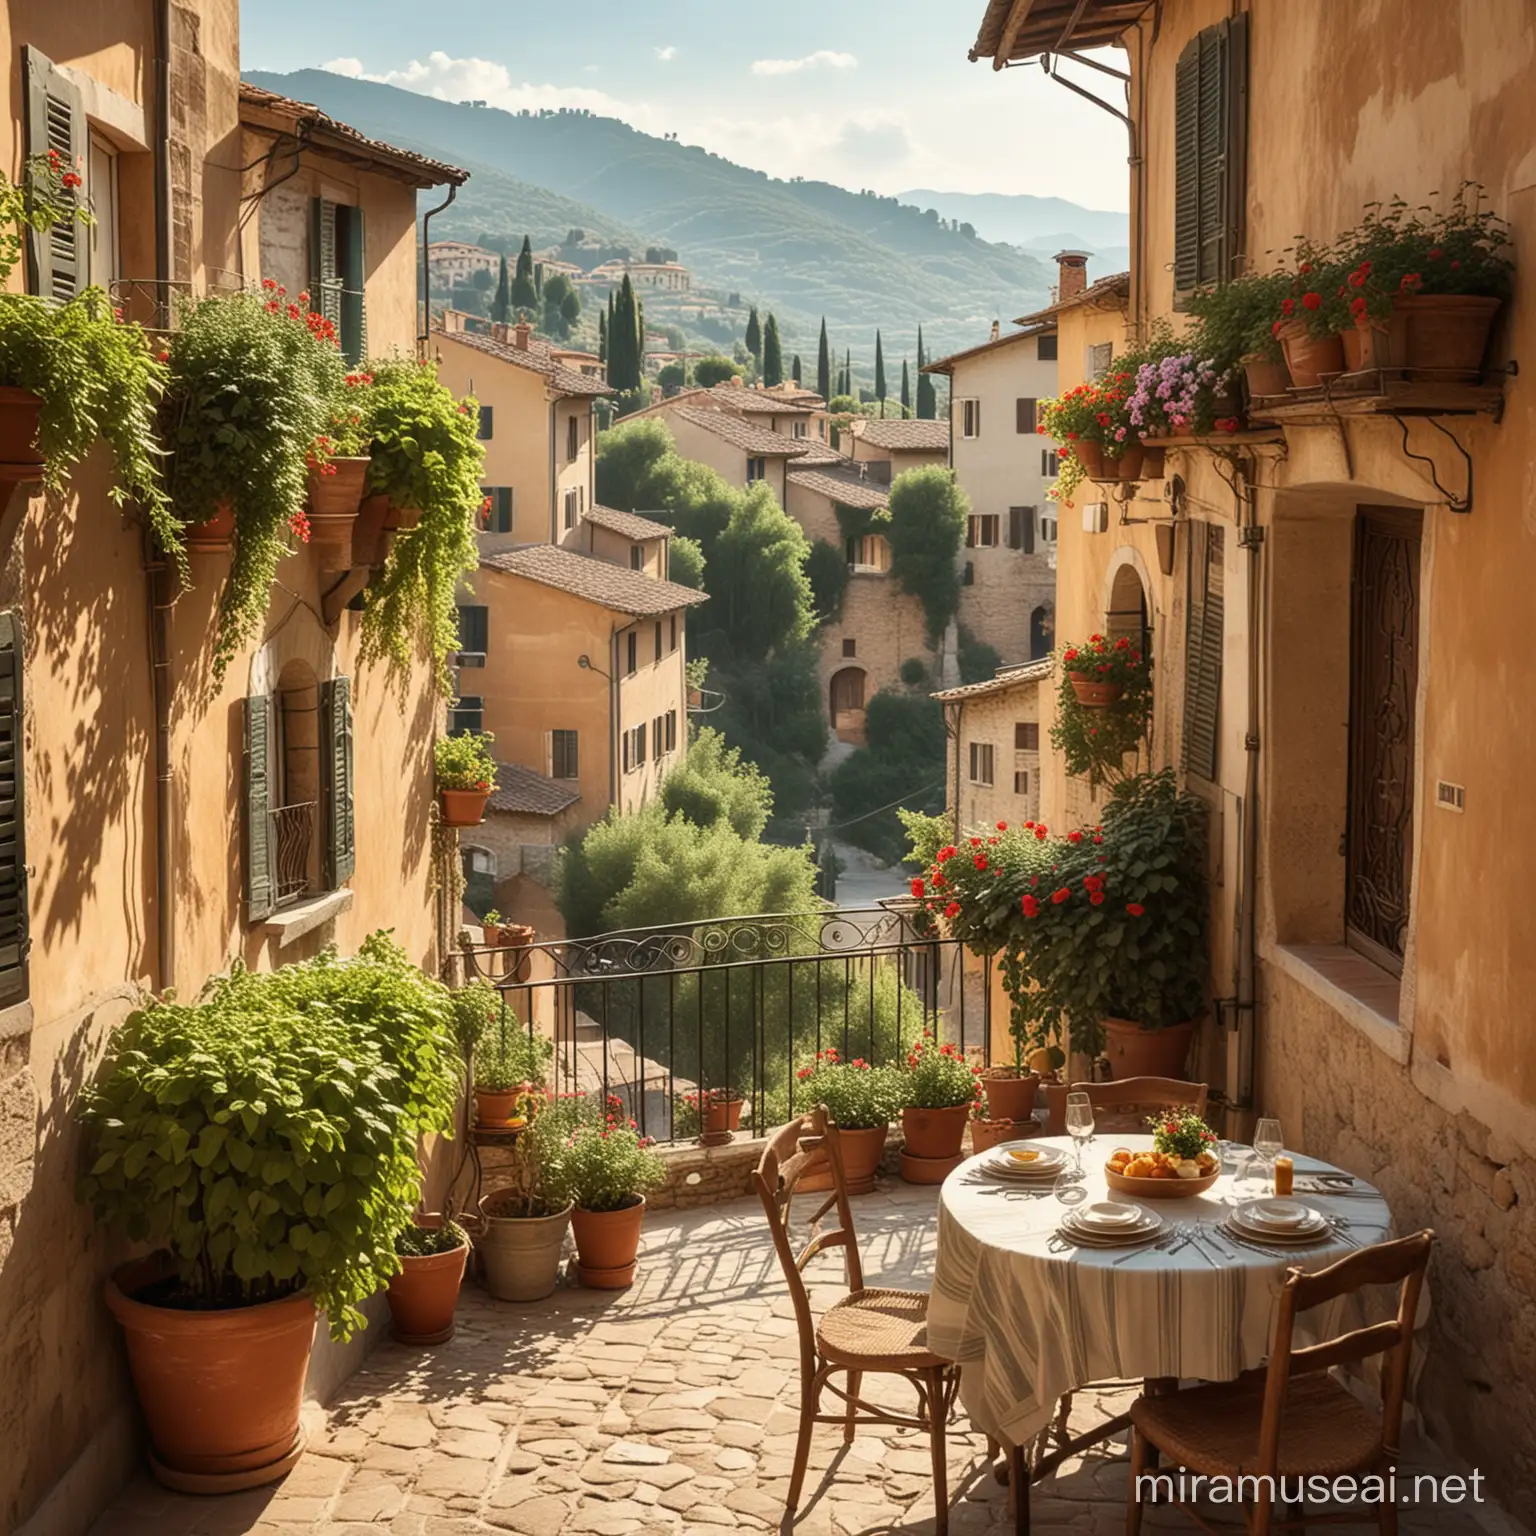 Warm Italian summer in Village with table and balcony landscape